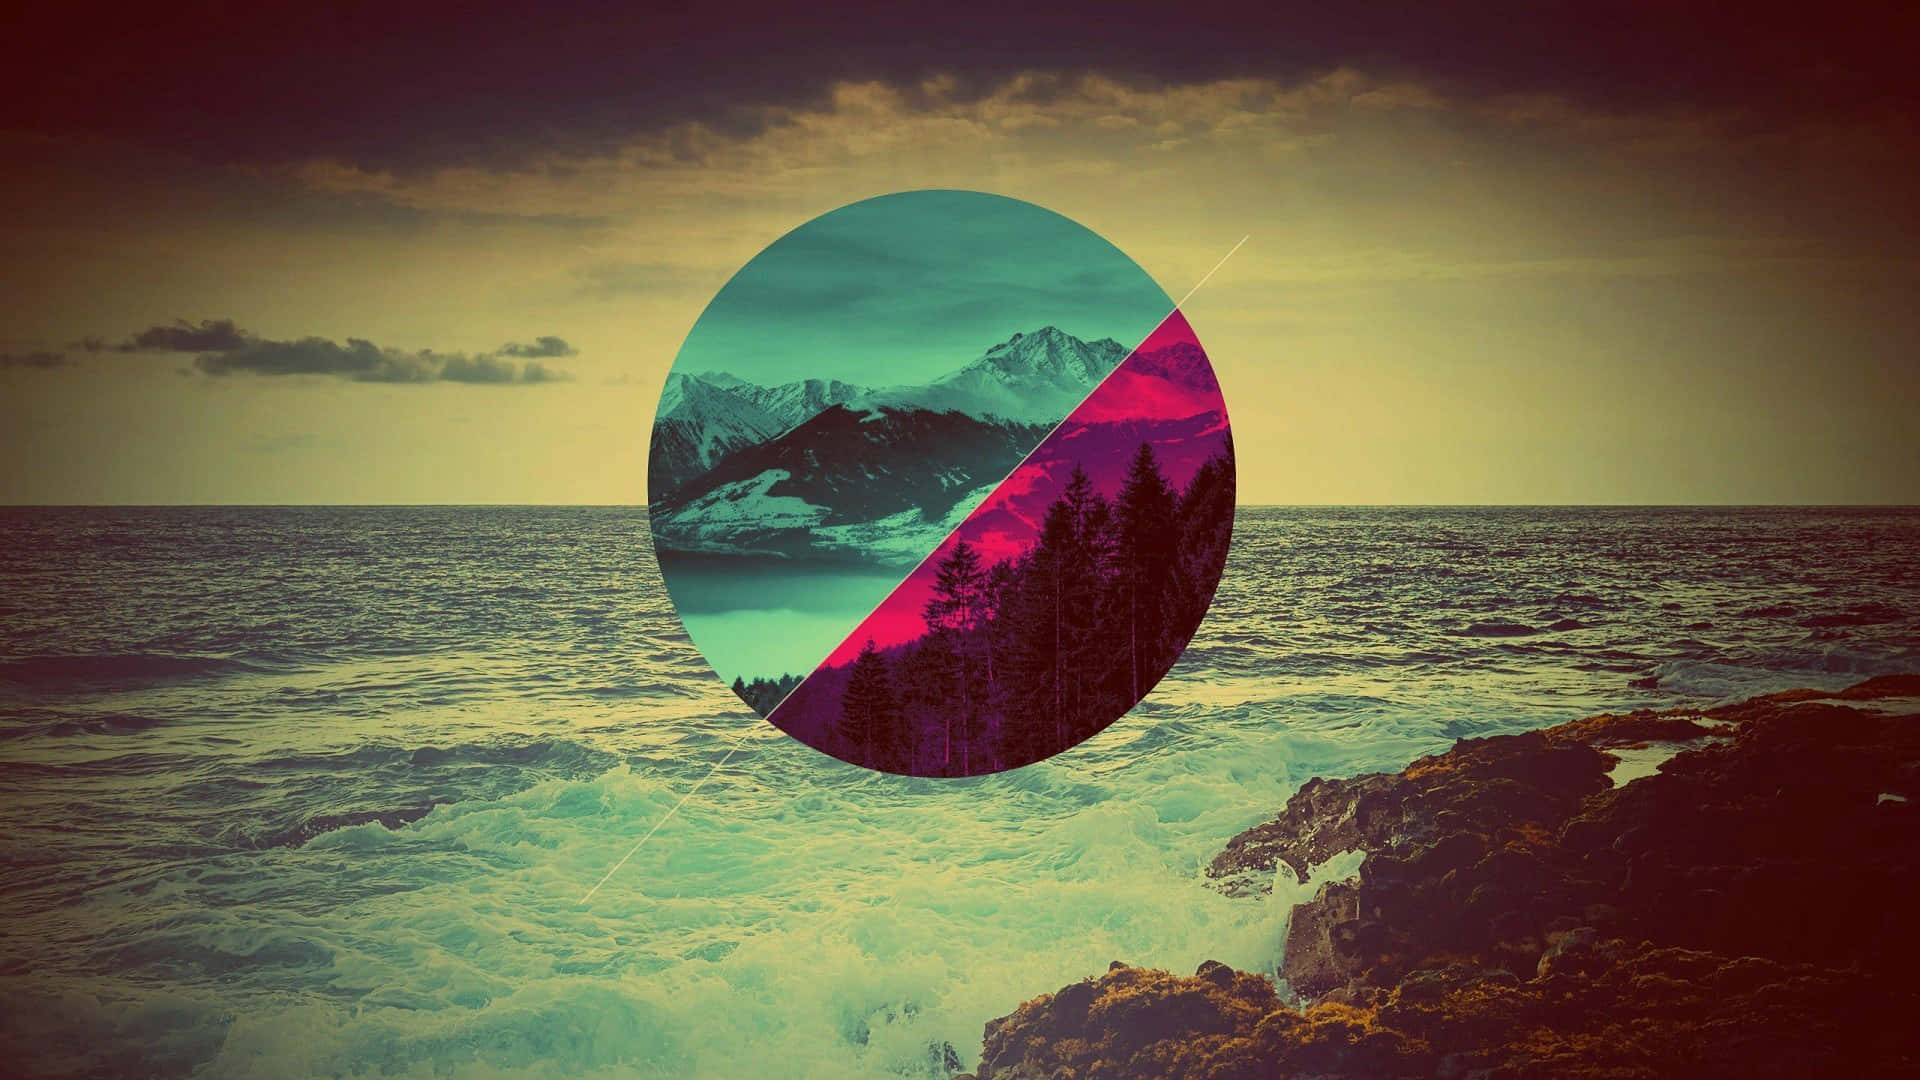 A Photo Of A Circular Image With Mountains And Ocean Wallpaper